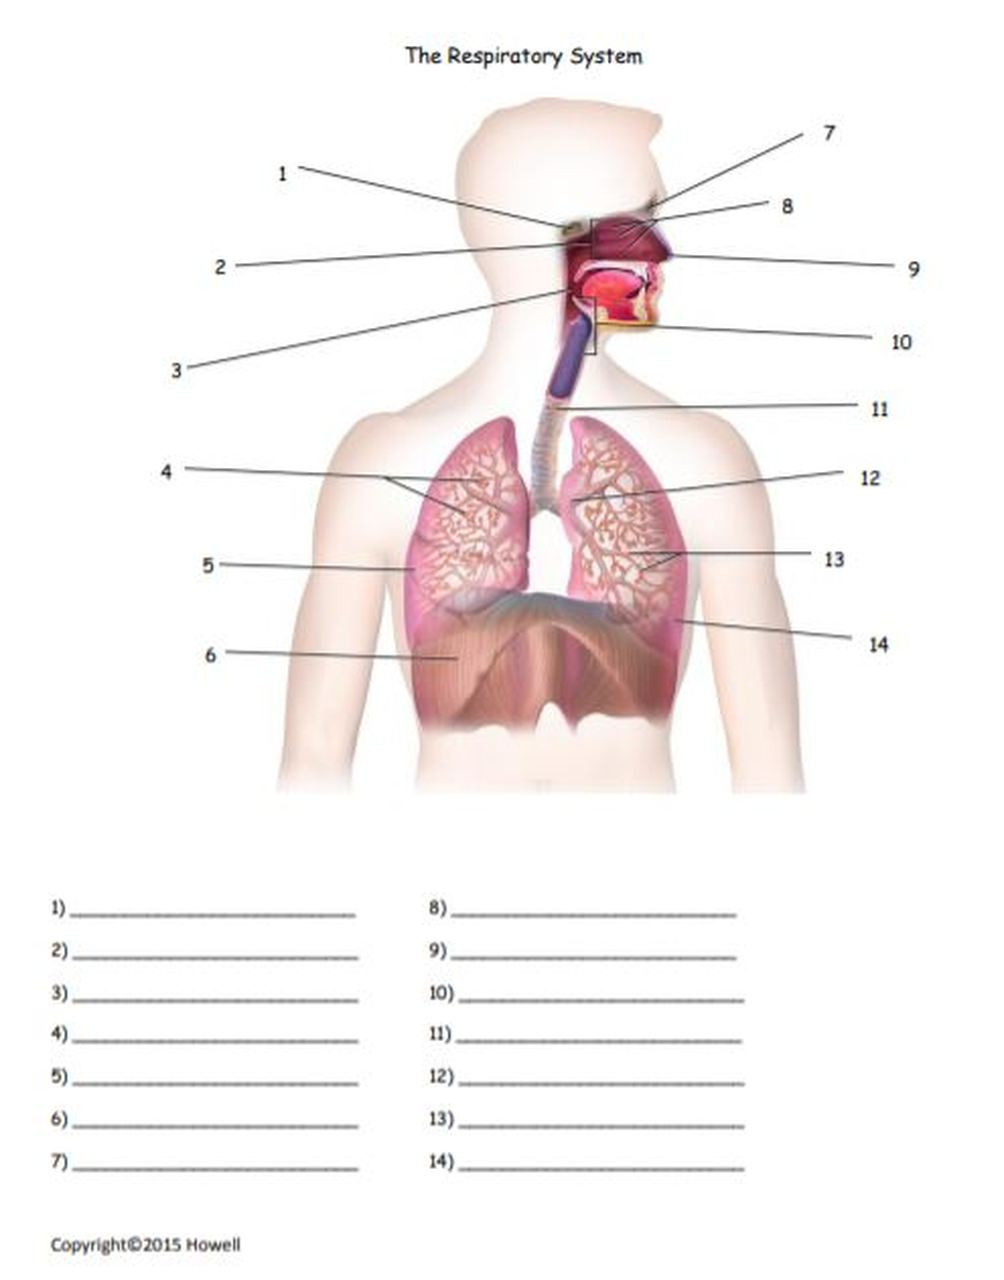 The Respiratory System Worksheet the Respiratory System Quiz or Worksheet